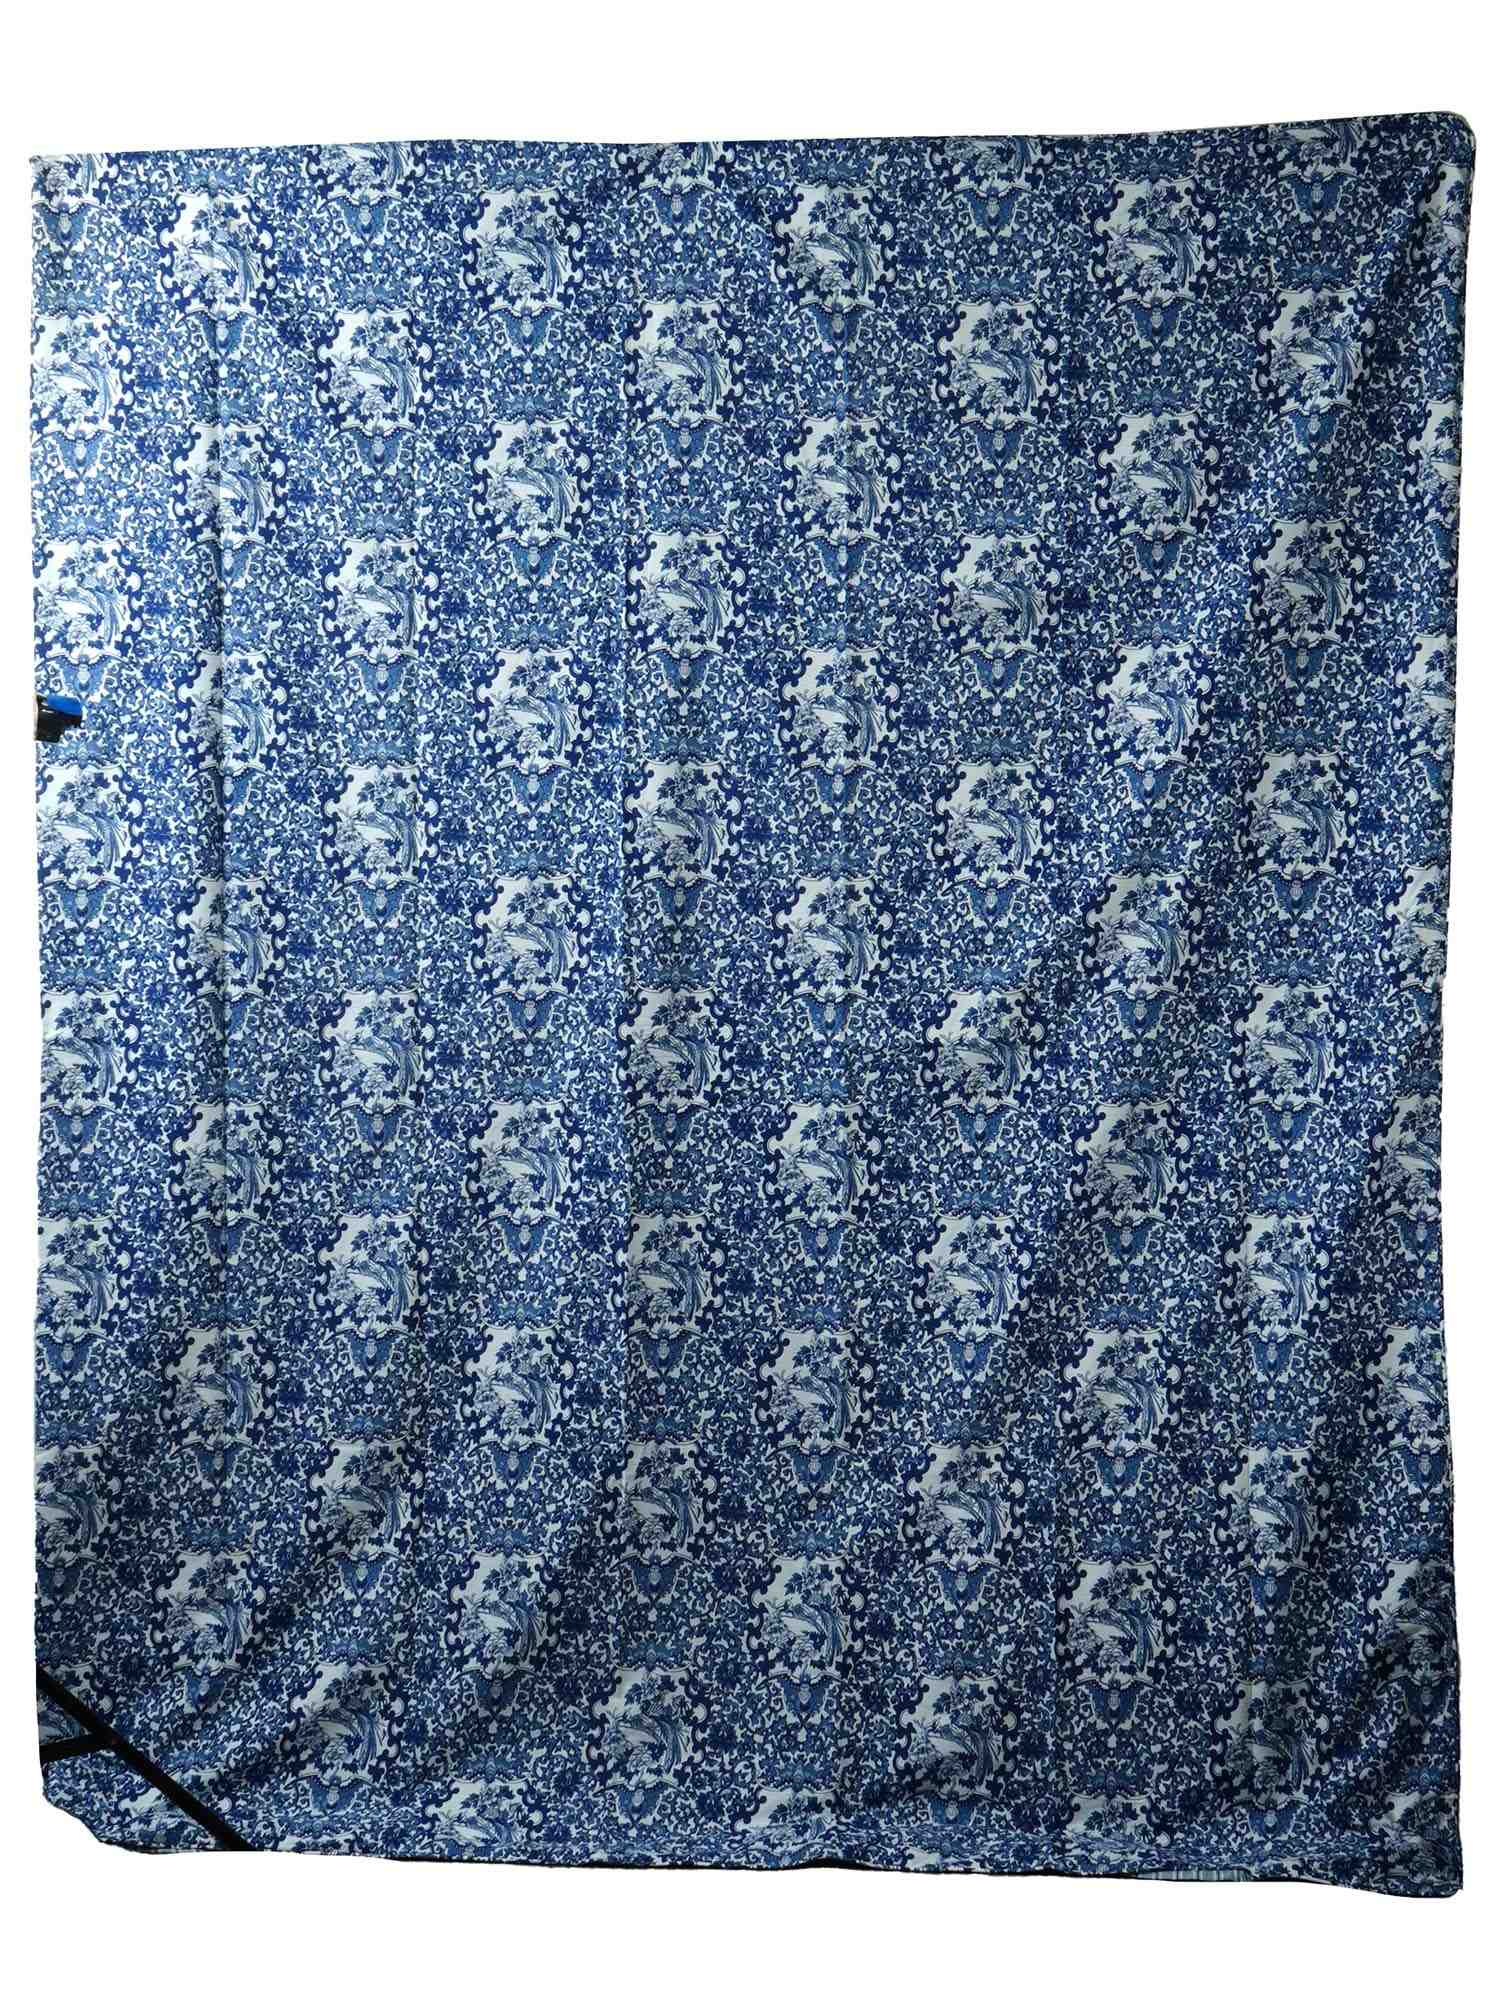 RALPH LAUREN CHINOISERIE BLUE AND WHITE BEDDING SET PIC-2